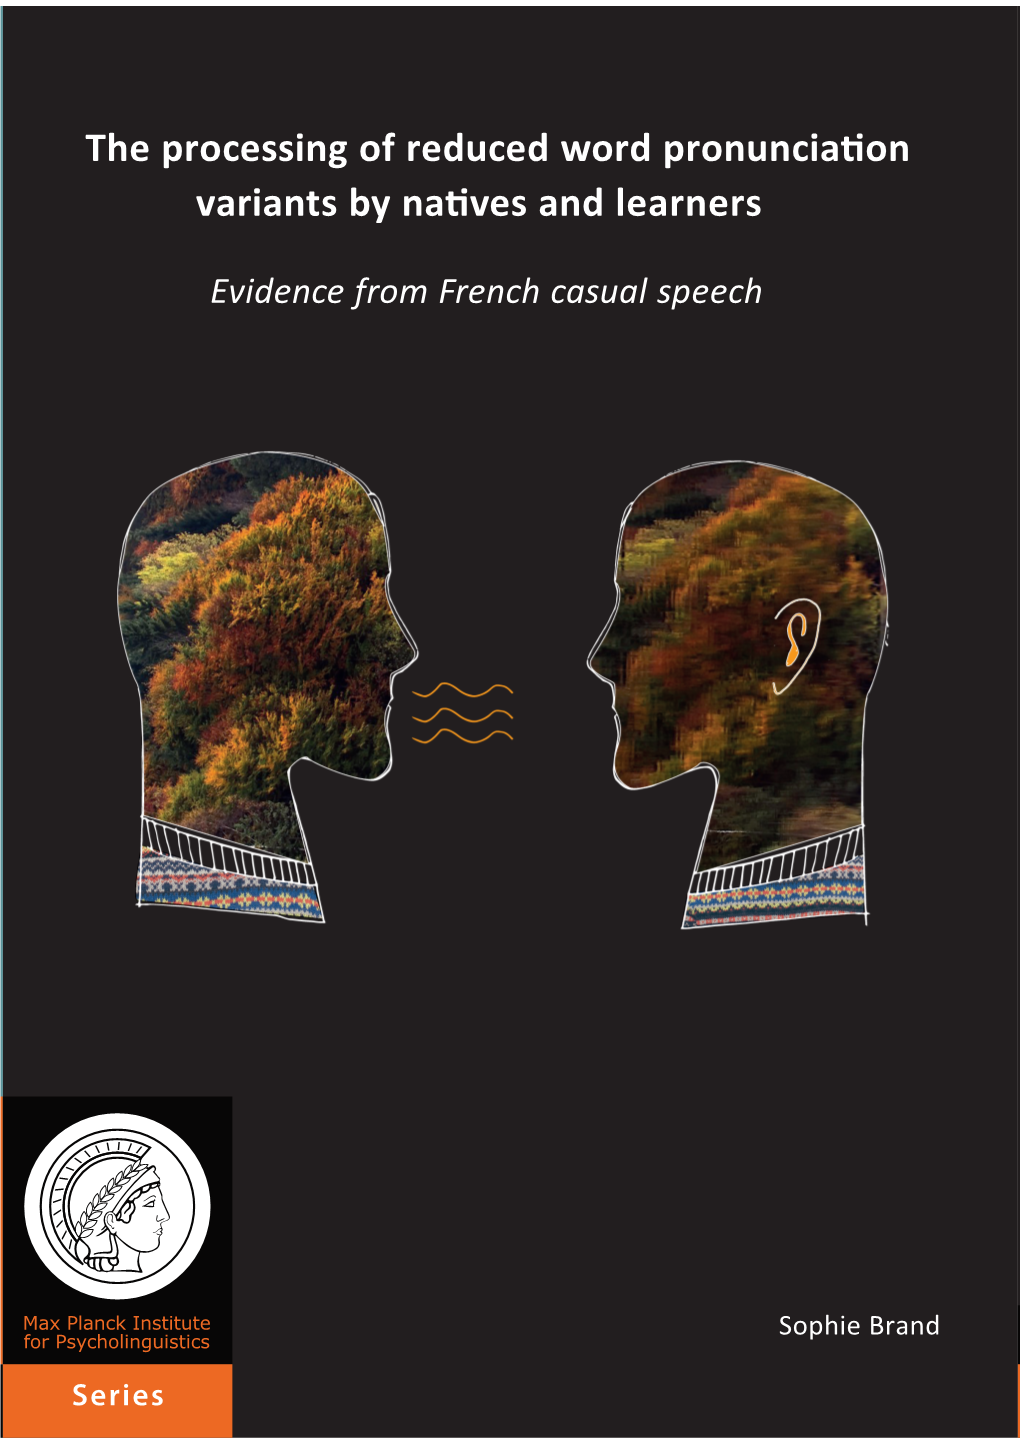 The Processing of Reduced Word Pronunciation Variants by Natives and Foreign Language Learners